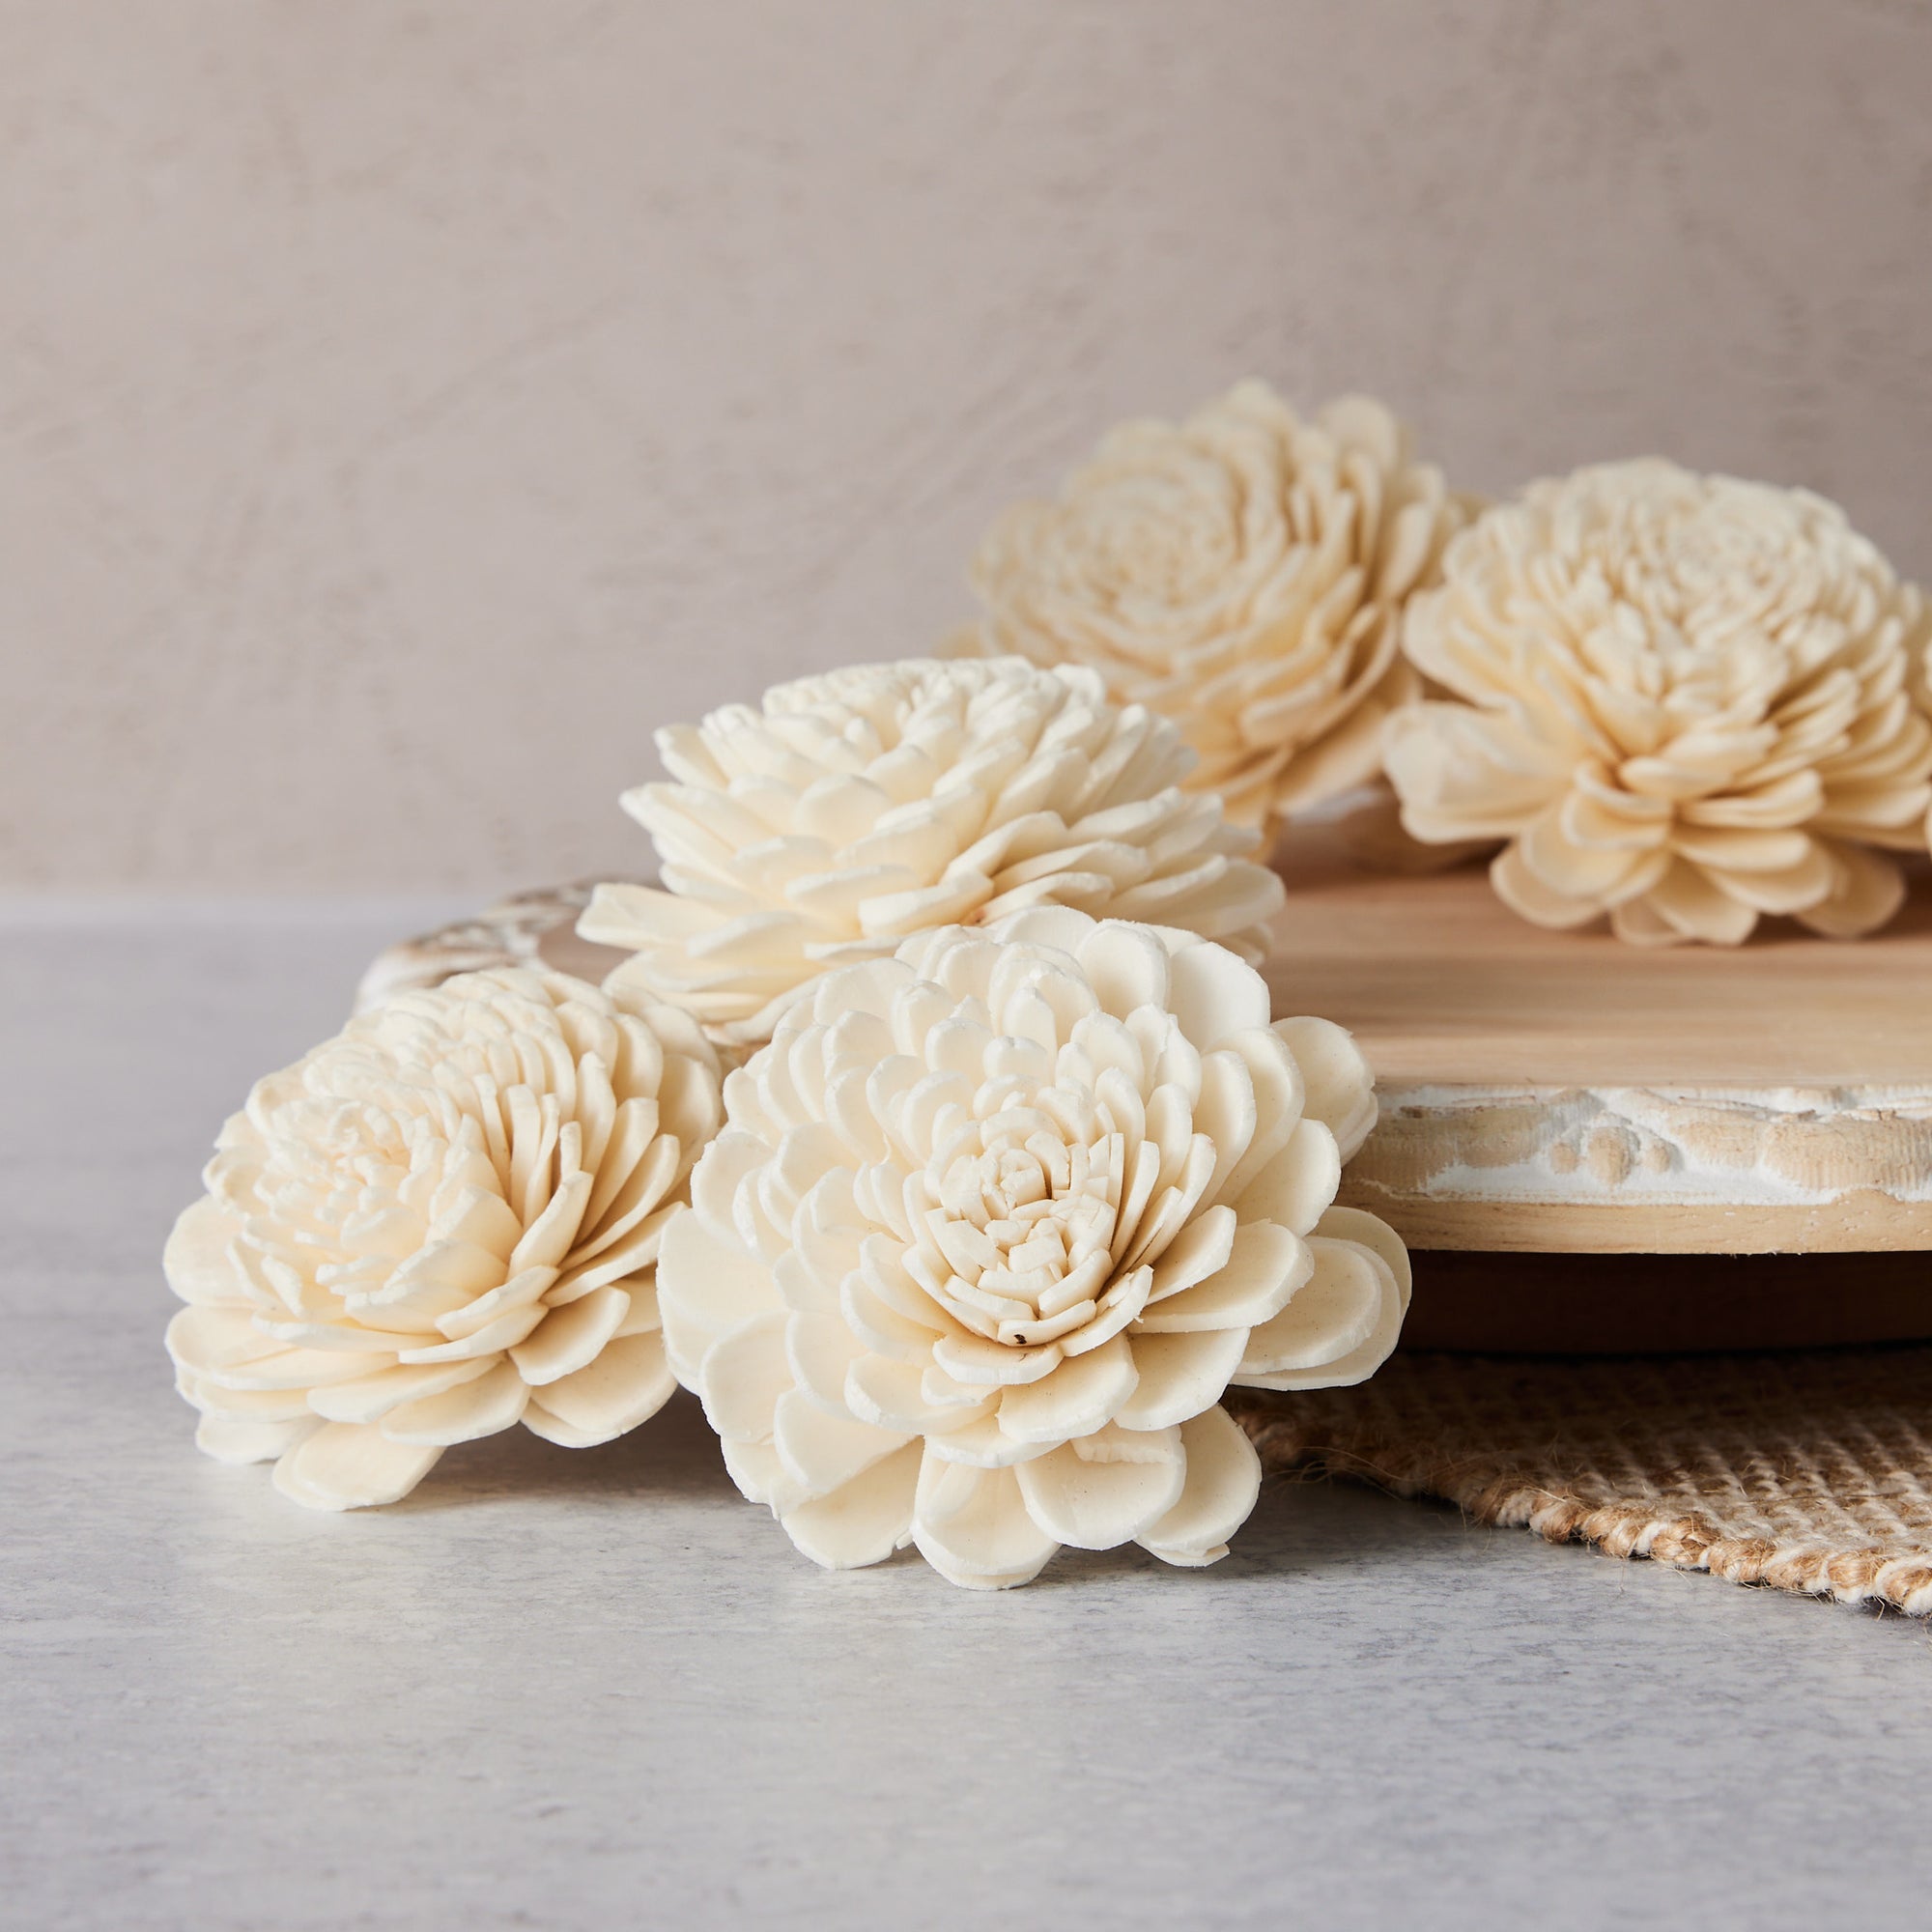 Marigold - set of 12 - 2.5 inches